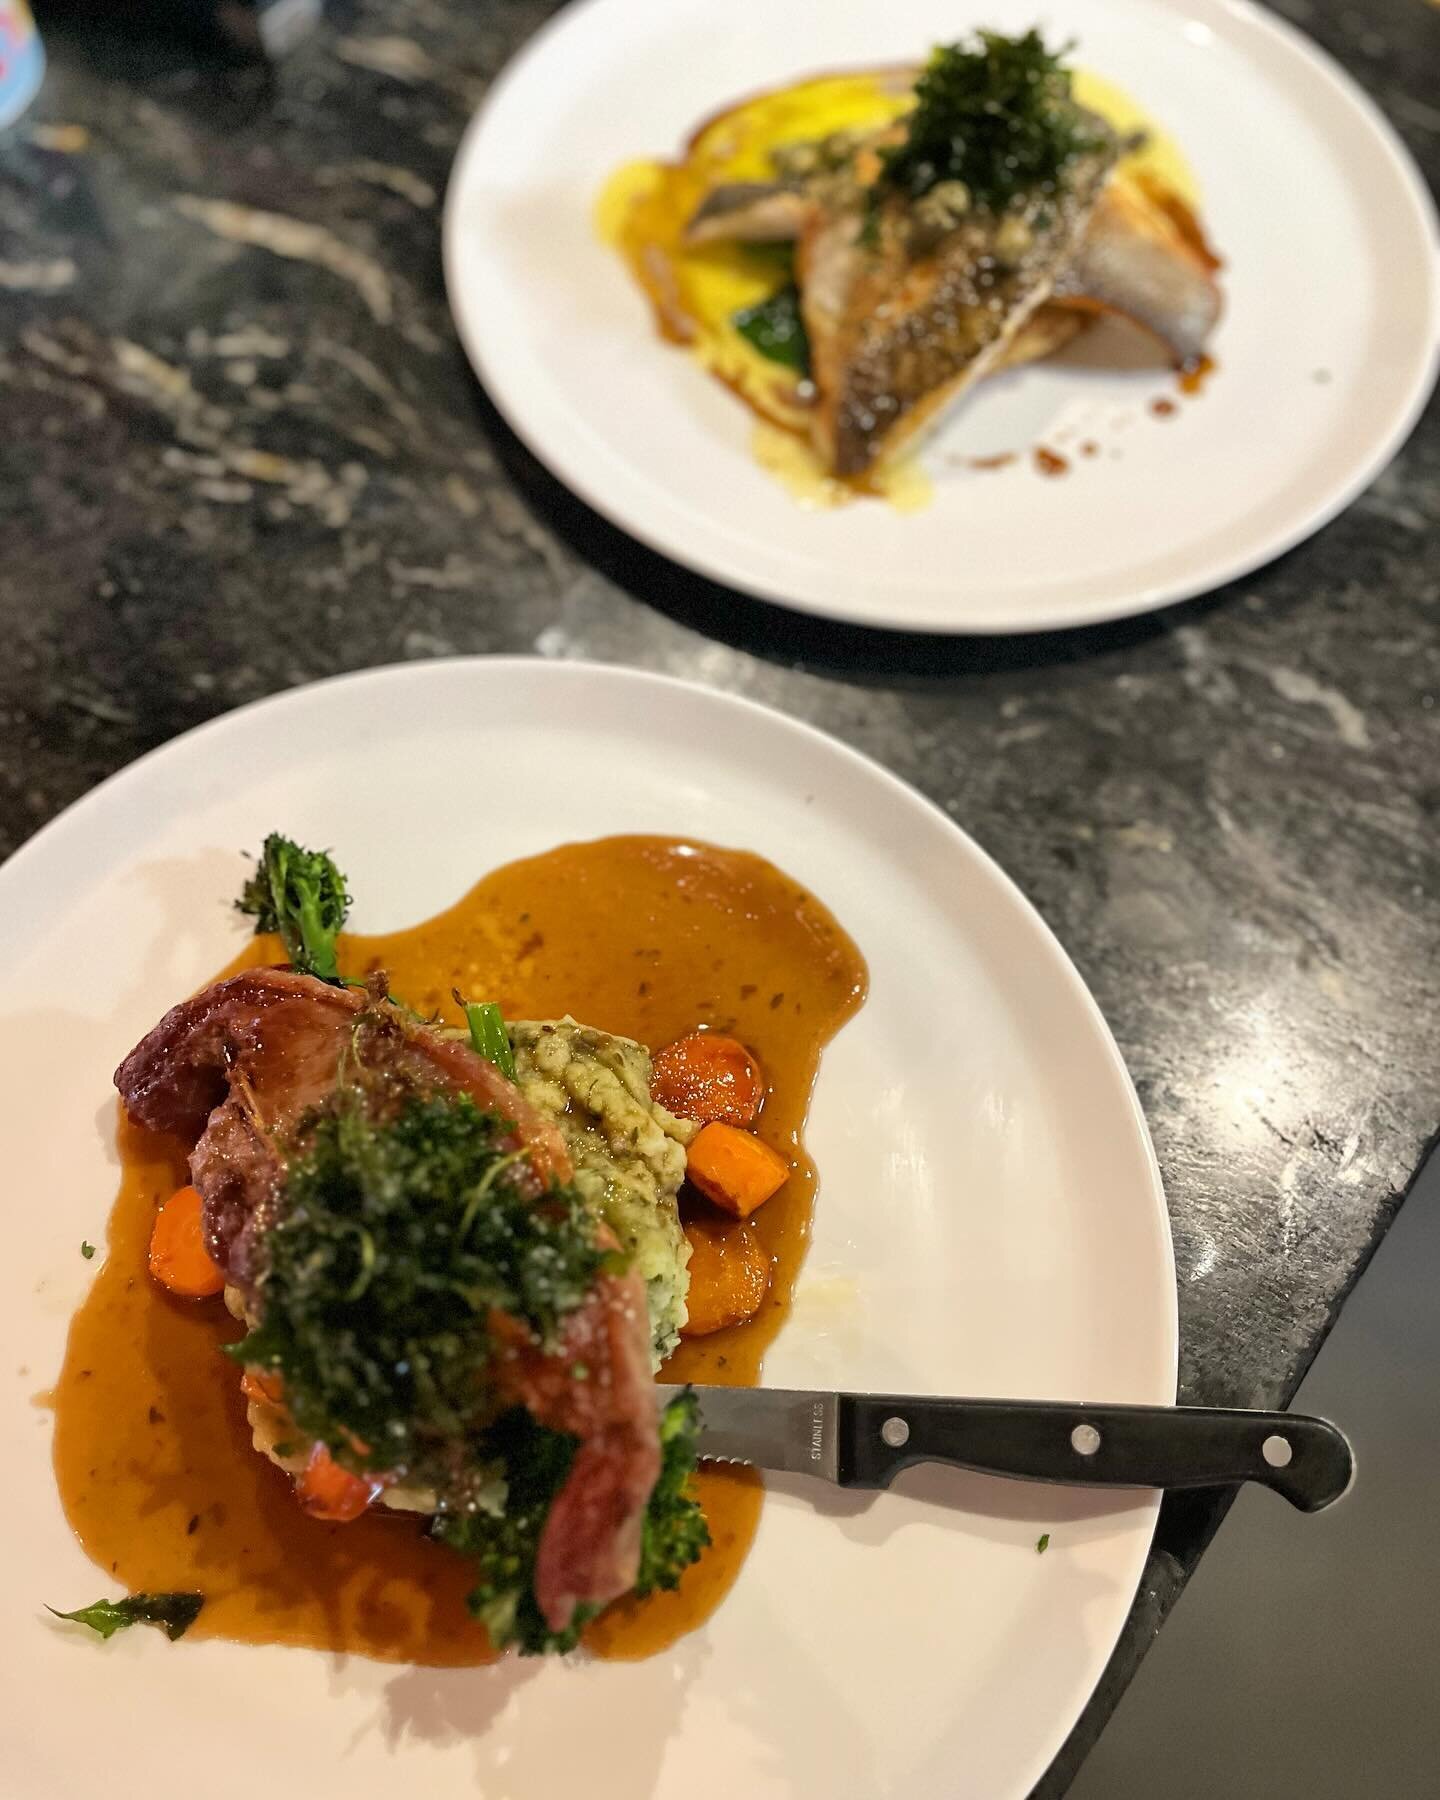 Two of our favourites from the specials board, 
Barnsley lamb chop, minted mash, honey glazed carrots, rosemary &amp; red wine jus
Seabass fillets, lemon infused potato rosti, sea samphire, lemon &amp; caper butter.